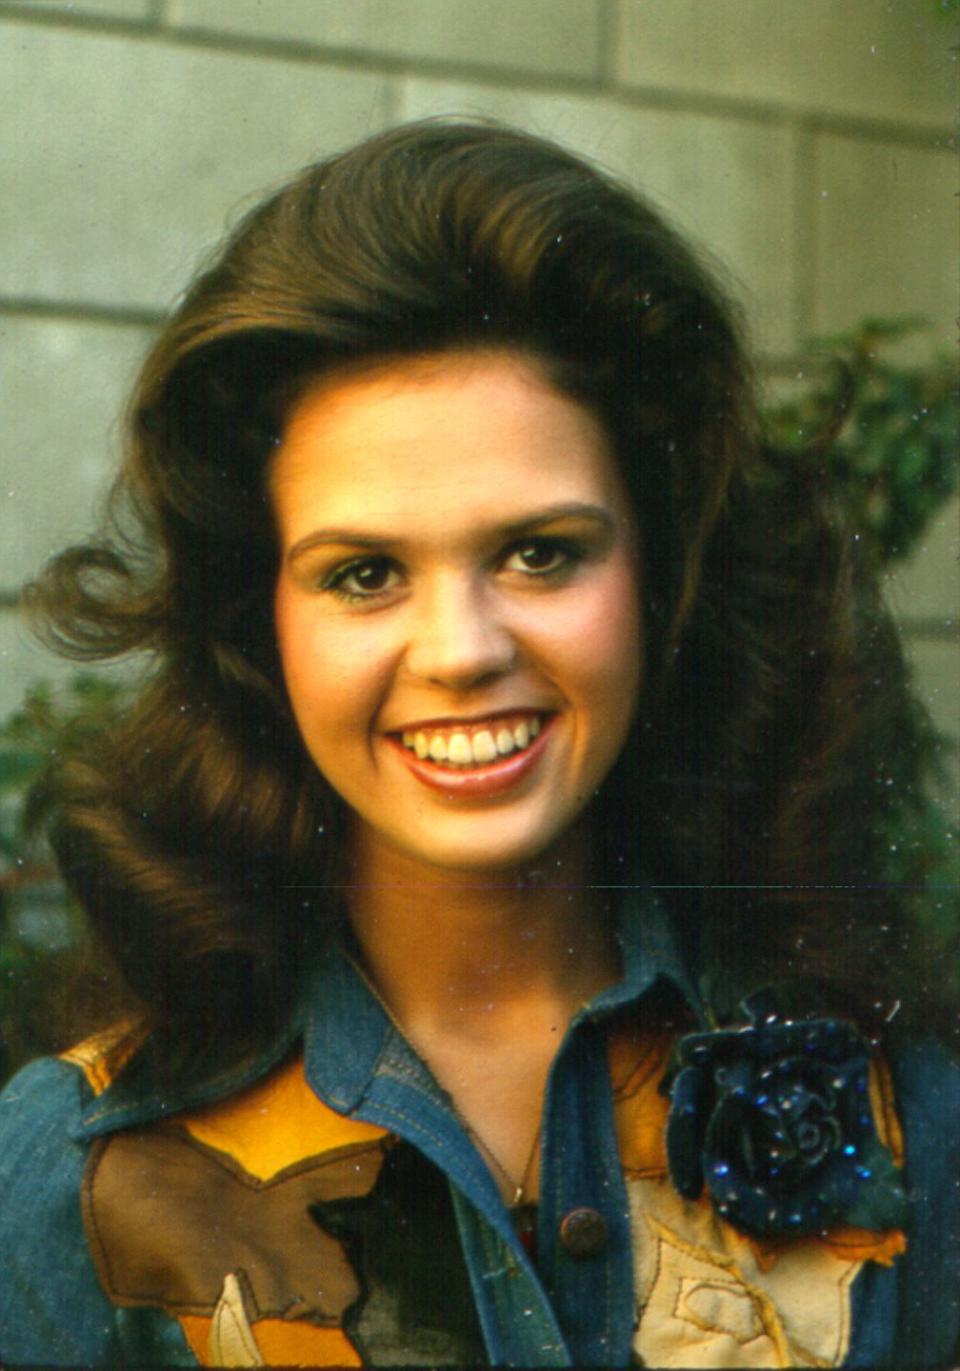 5) But Marie Osmond was the front-runner.